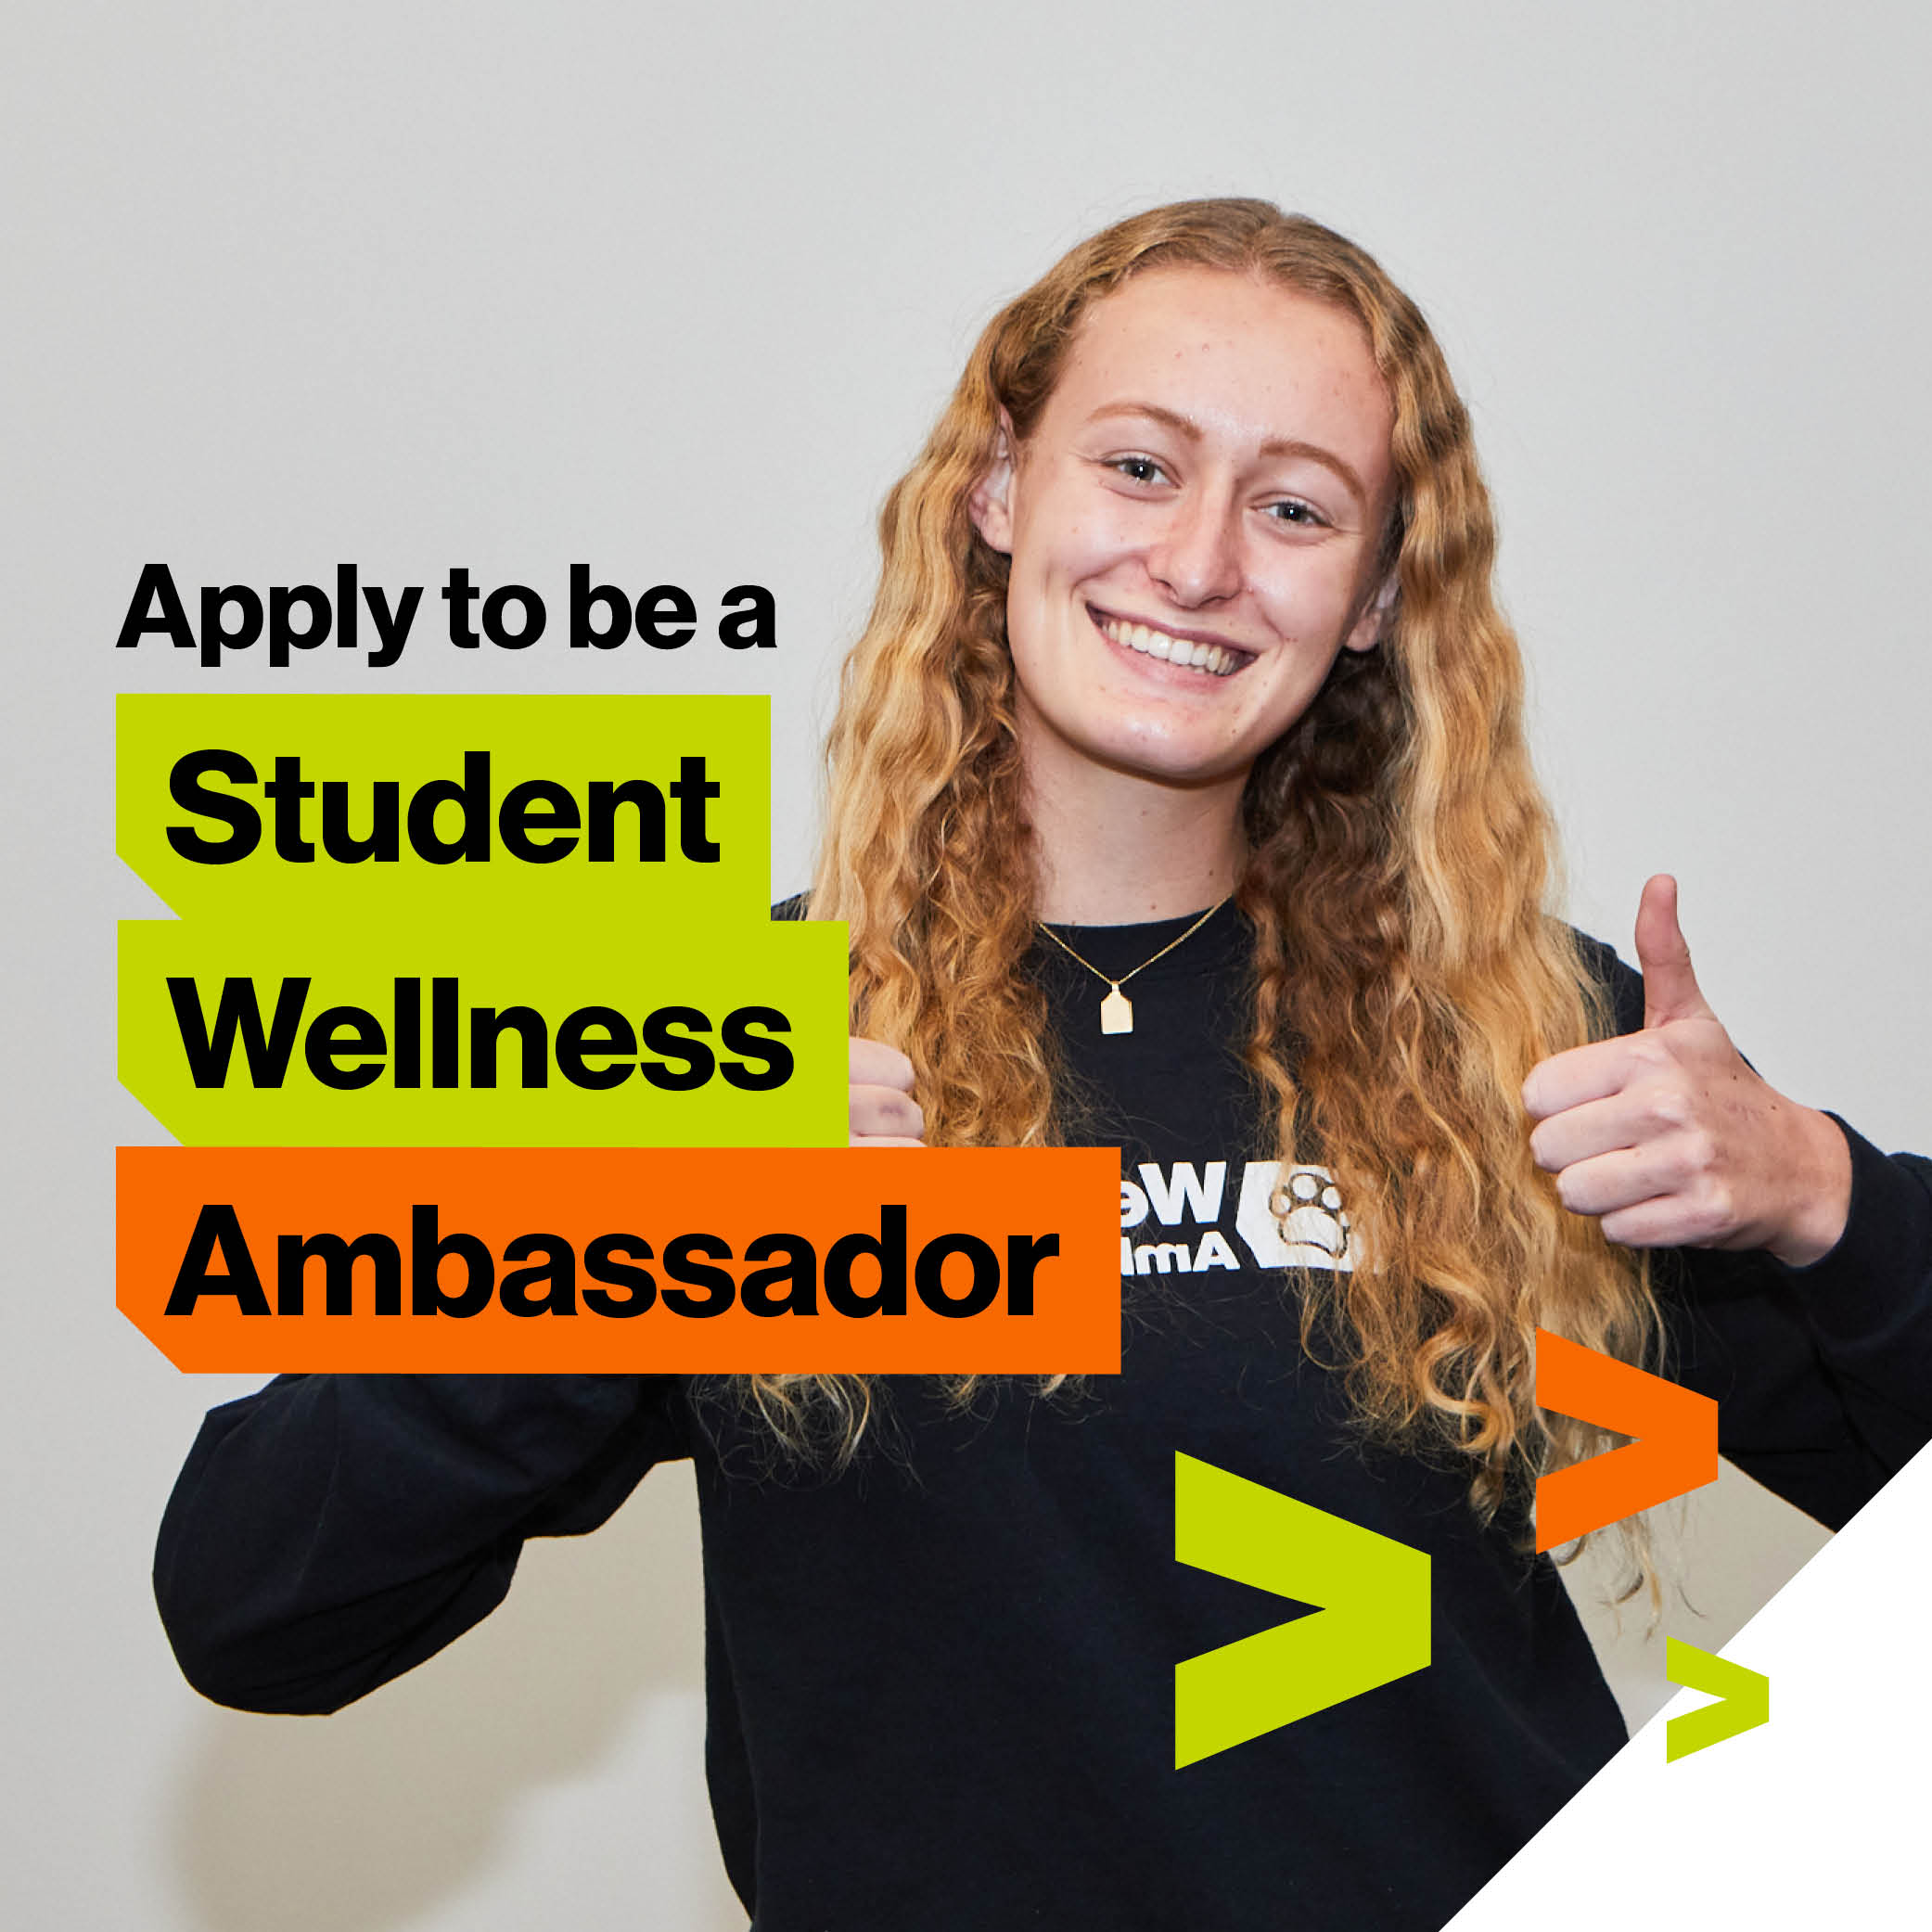 One student wearing a Student Wellness Ambassador t-shirt with Apply to be a Student Wellness Ambassador text